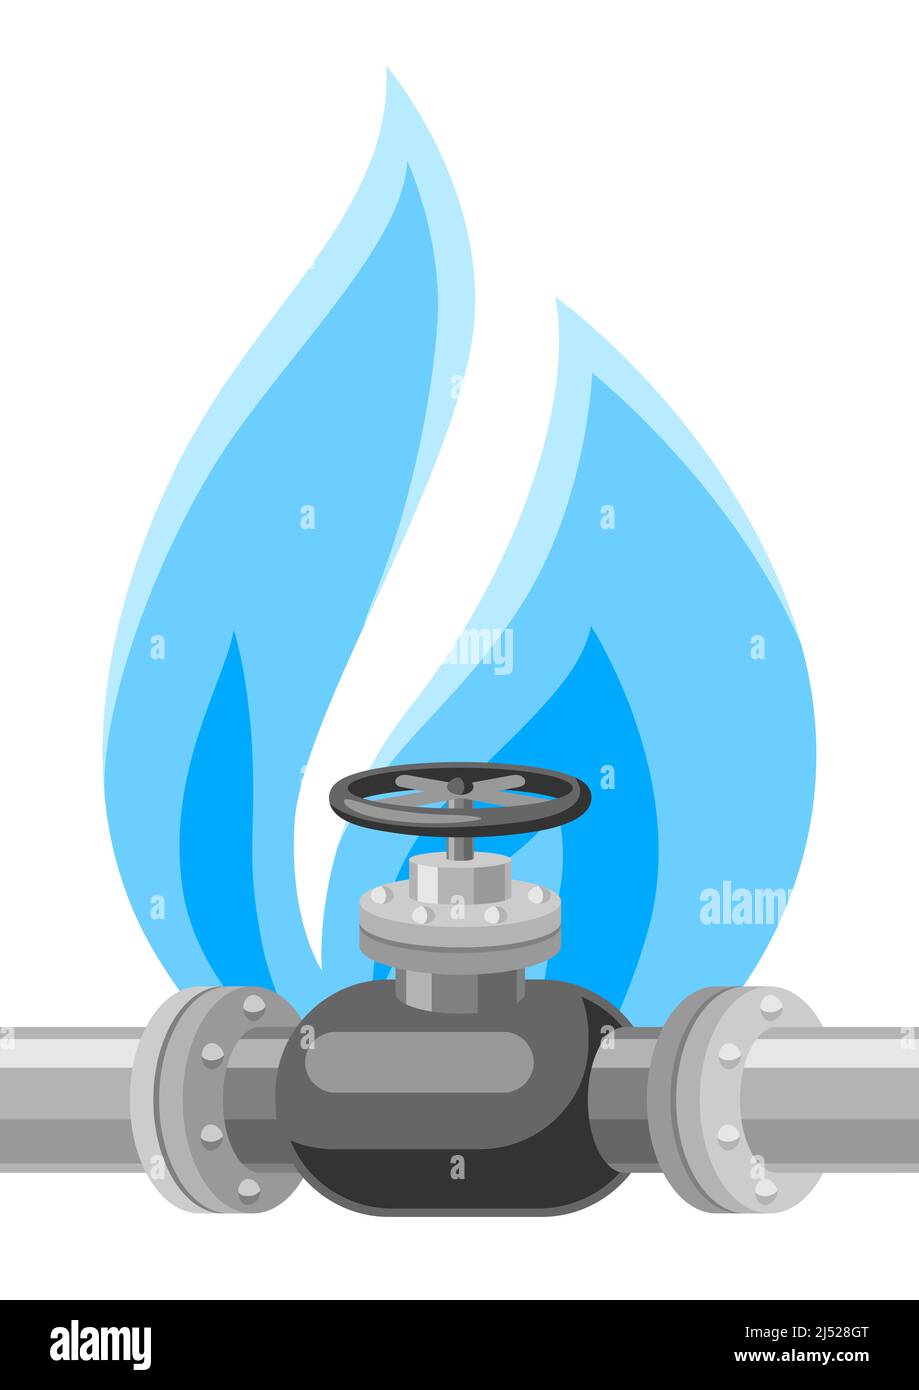 Illustration of shut off valve on natural gas pipe. Industrial and business stylized image. Stock Vector